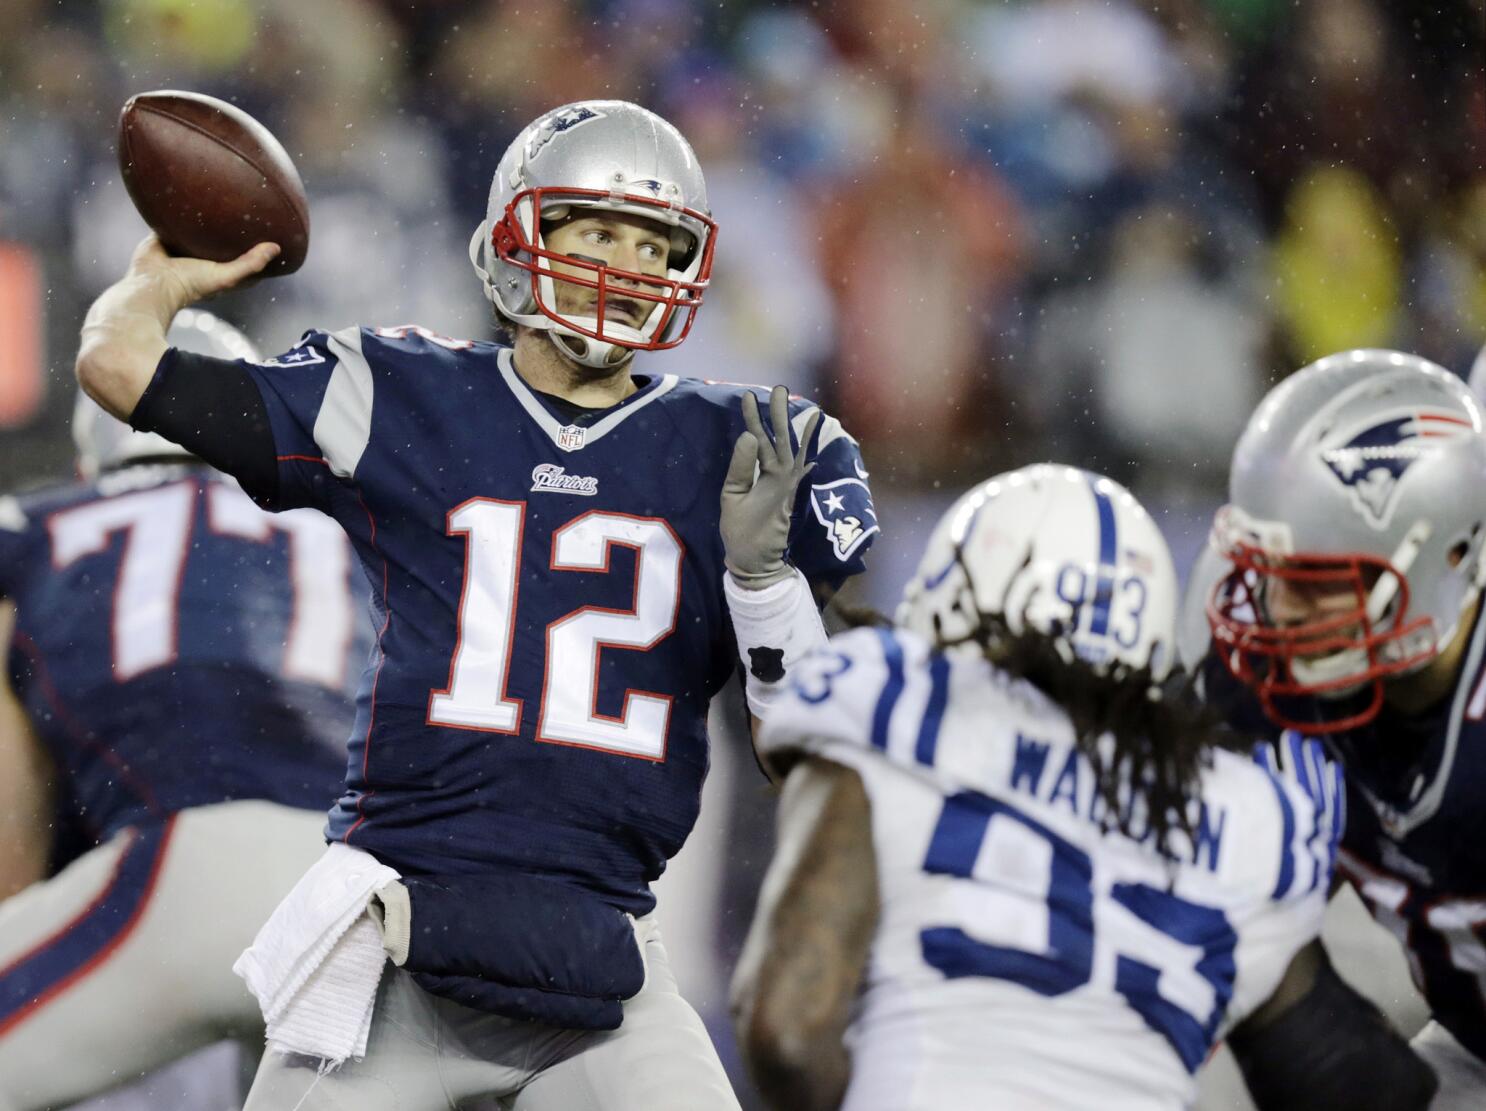 Patriots overwhelm Colts, 45-7, in AFC title game - Los Angeles Times